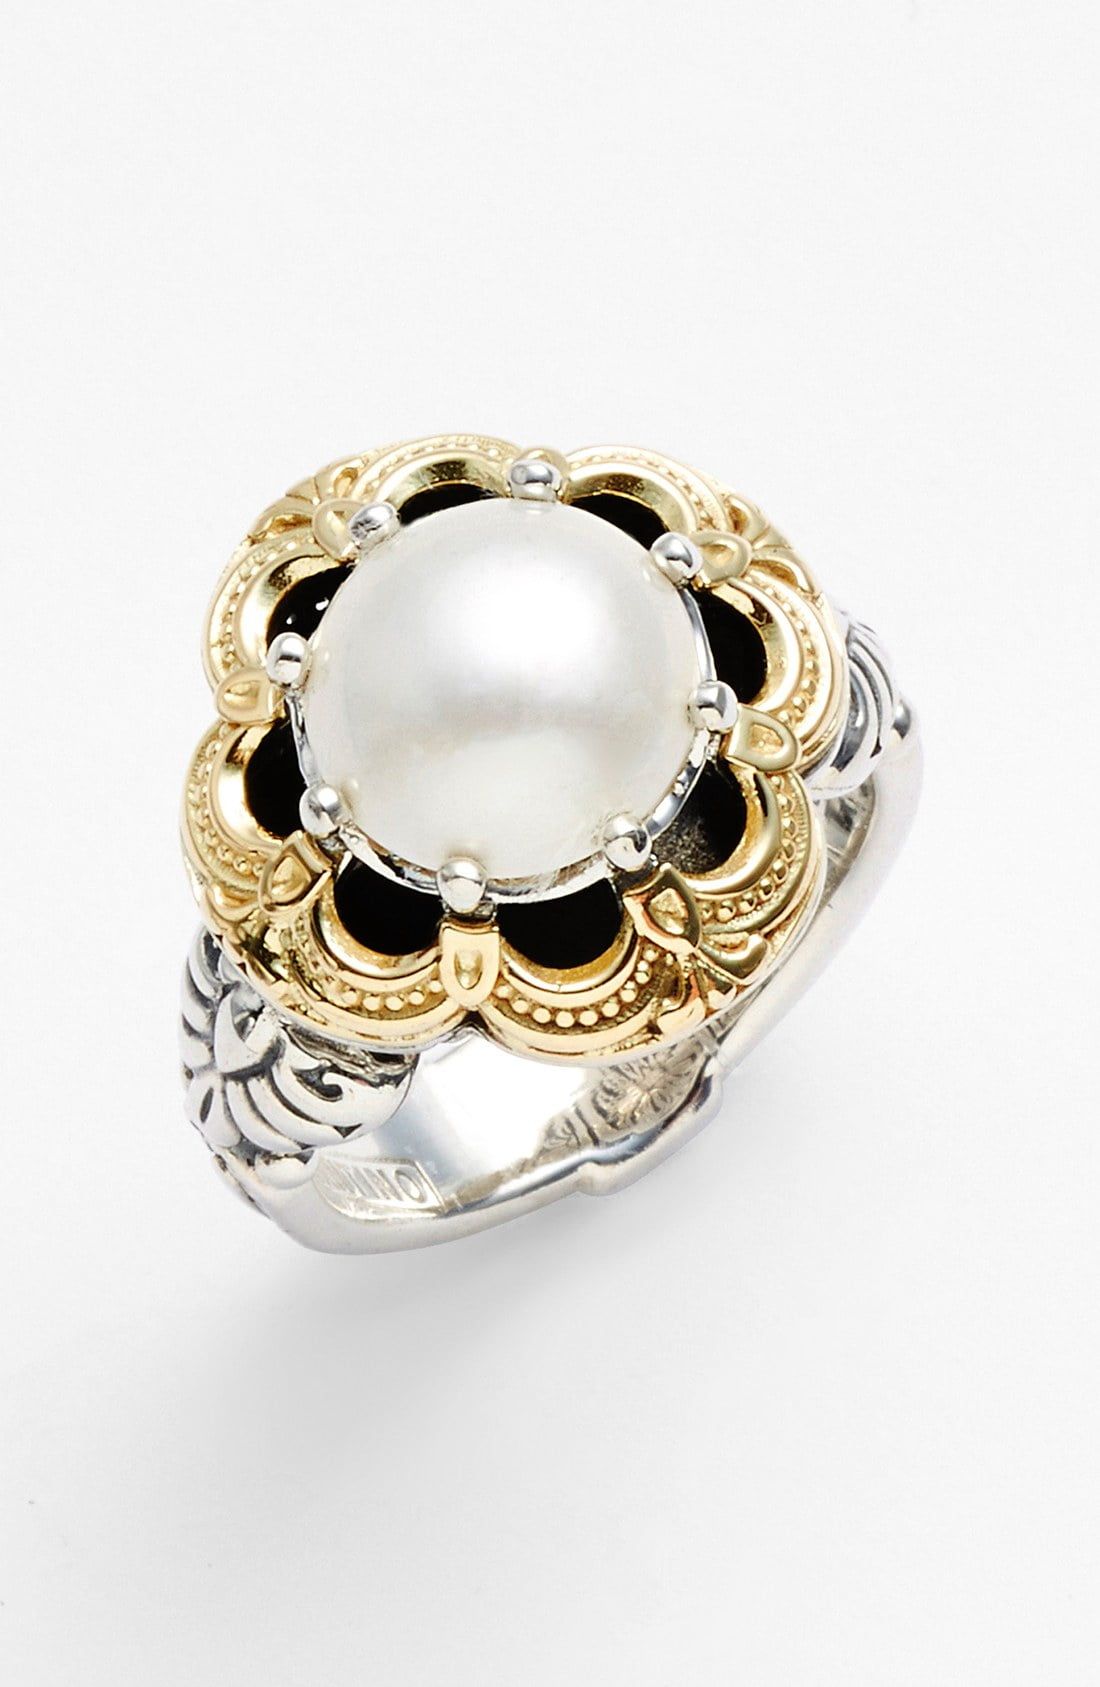 Women's Pearl Rings | Nordstrom Inside Best And Newest Bead & Freshwater Cultured Pearl Open Rings (View 18 of 25)